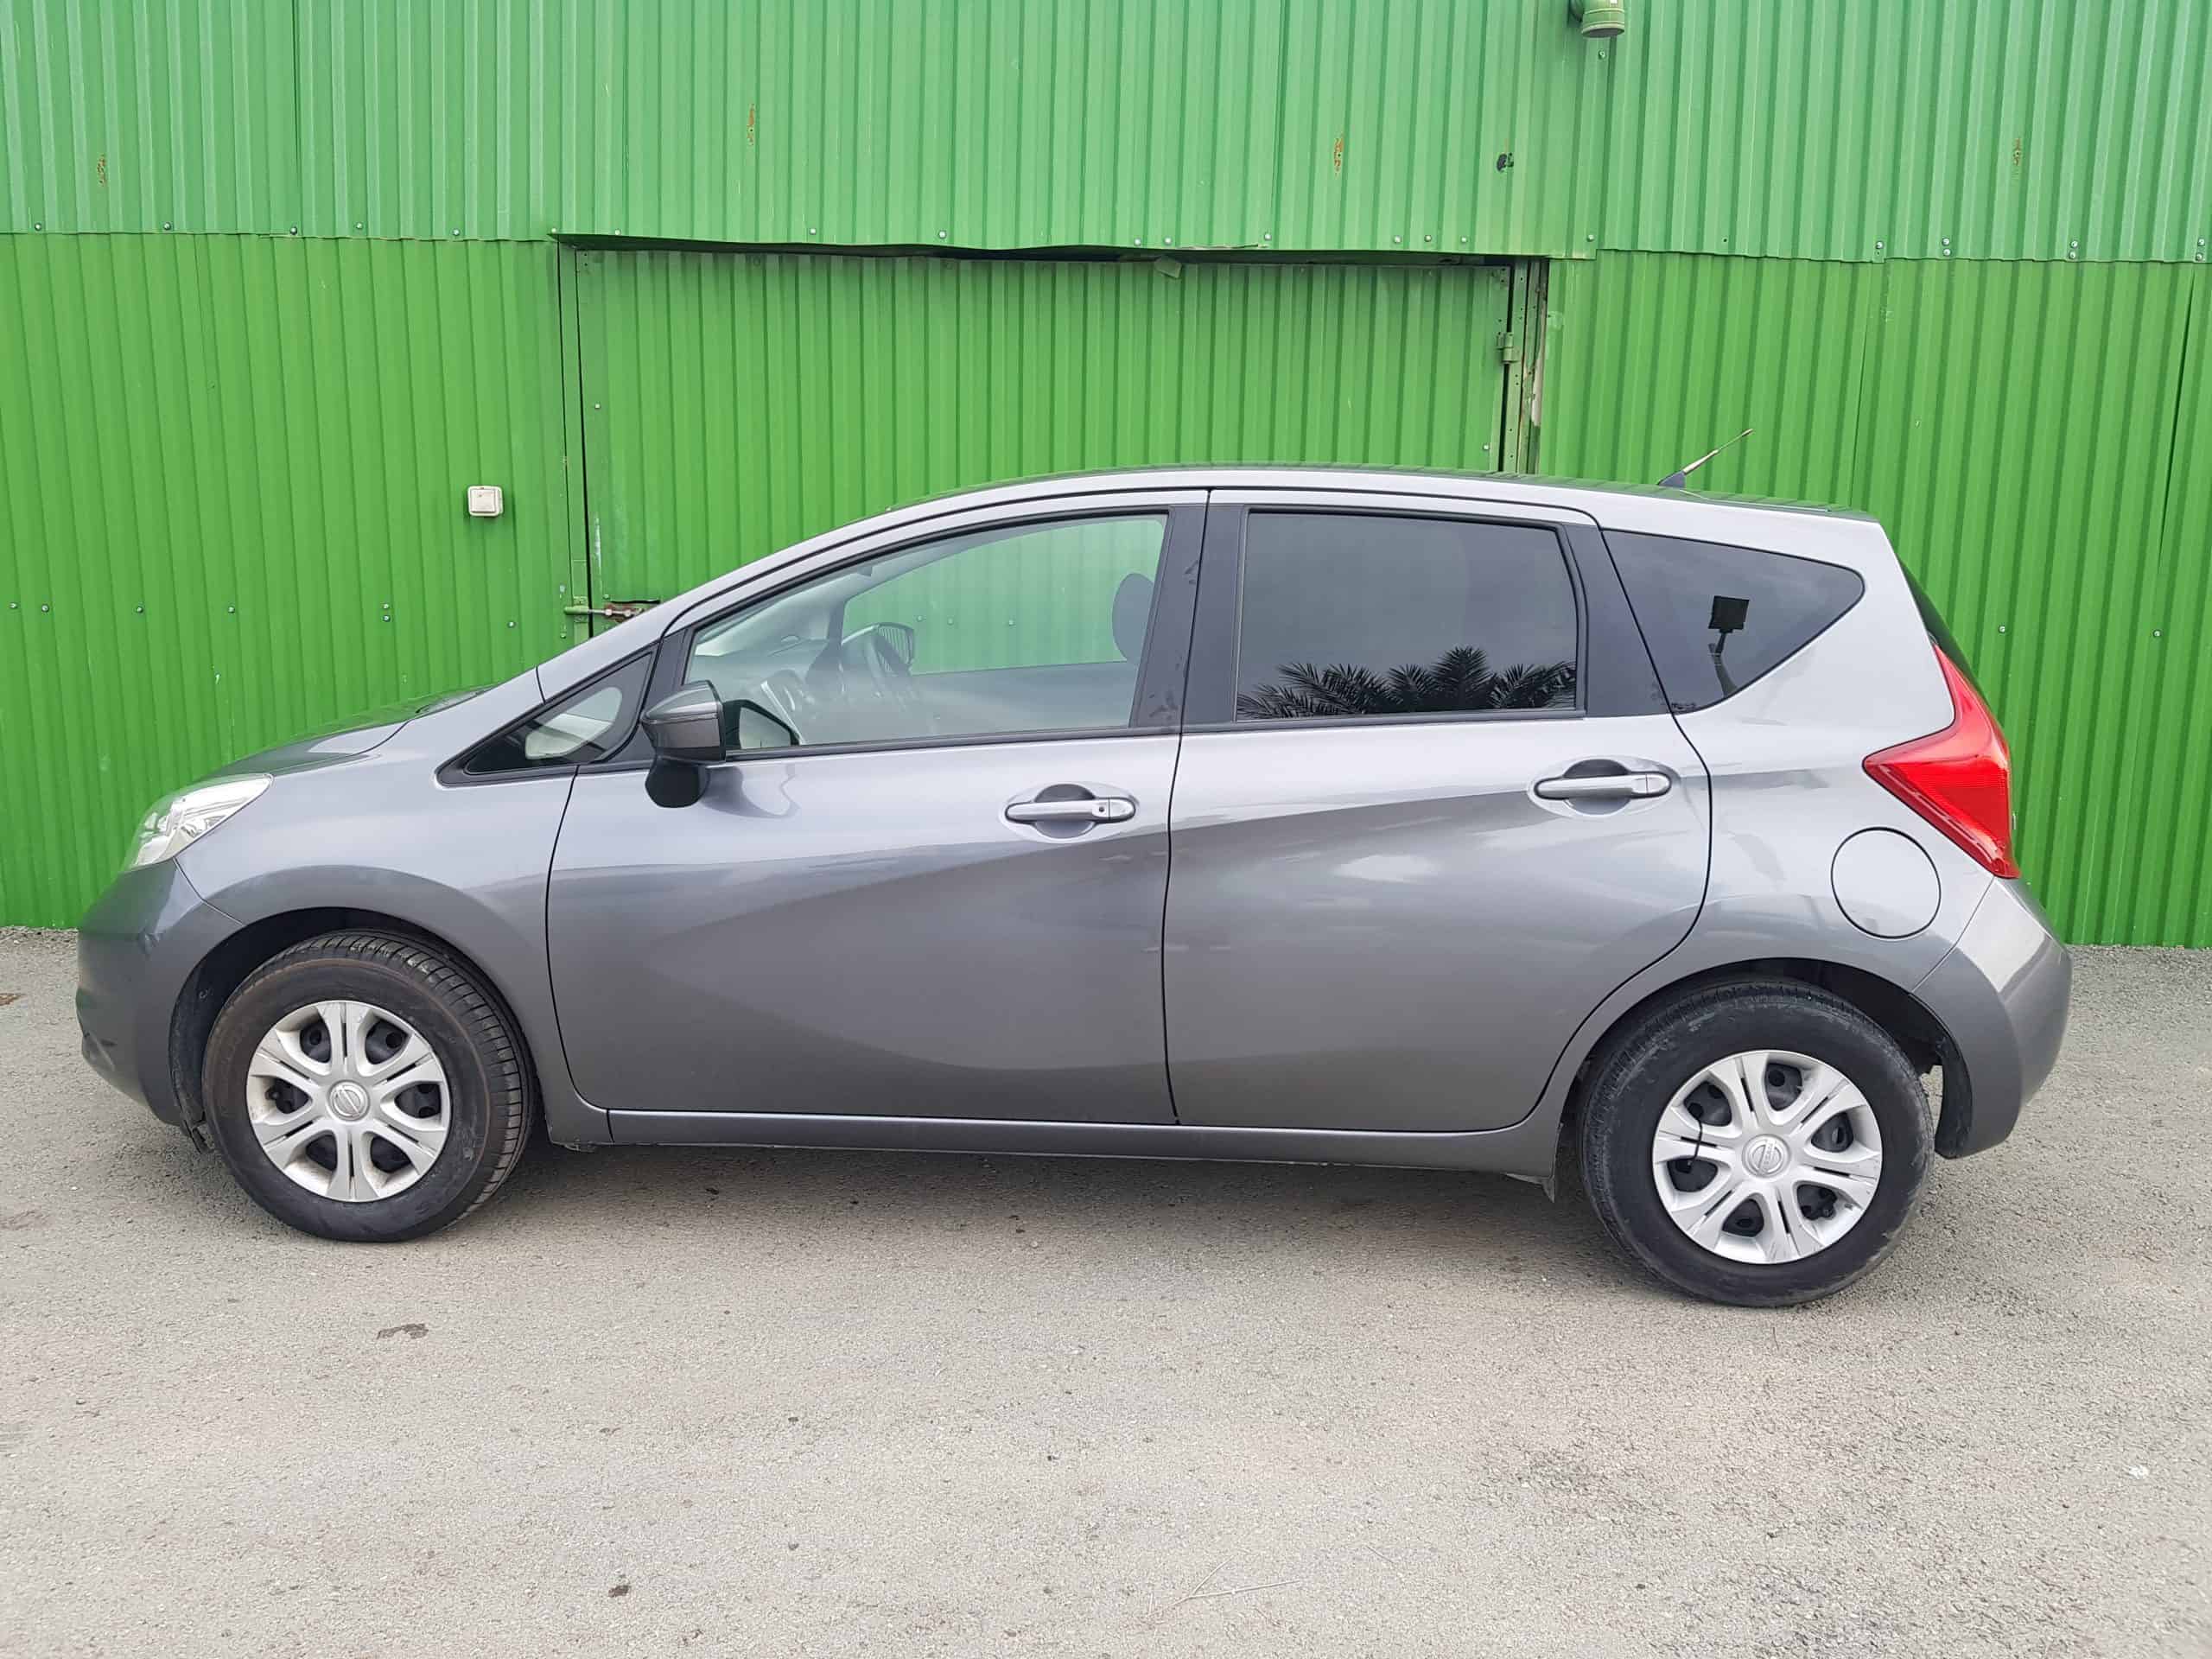 NISSAN NOTE 1.2 AUTOMATIC 2015 Asg Cars